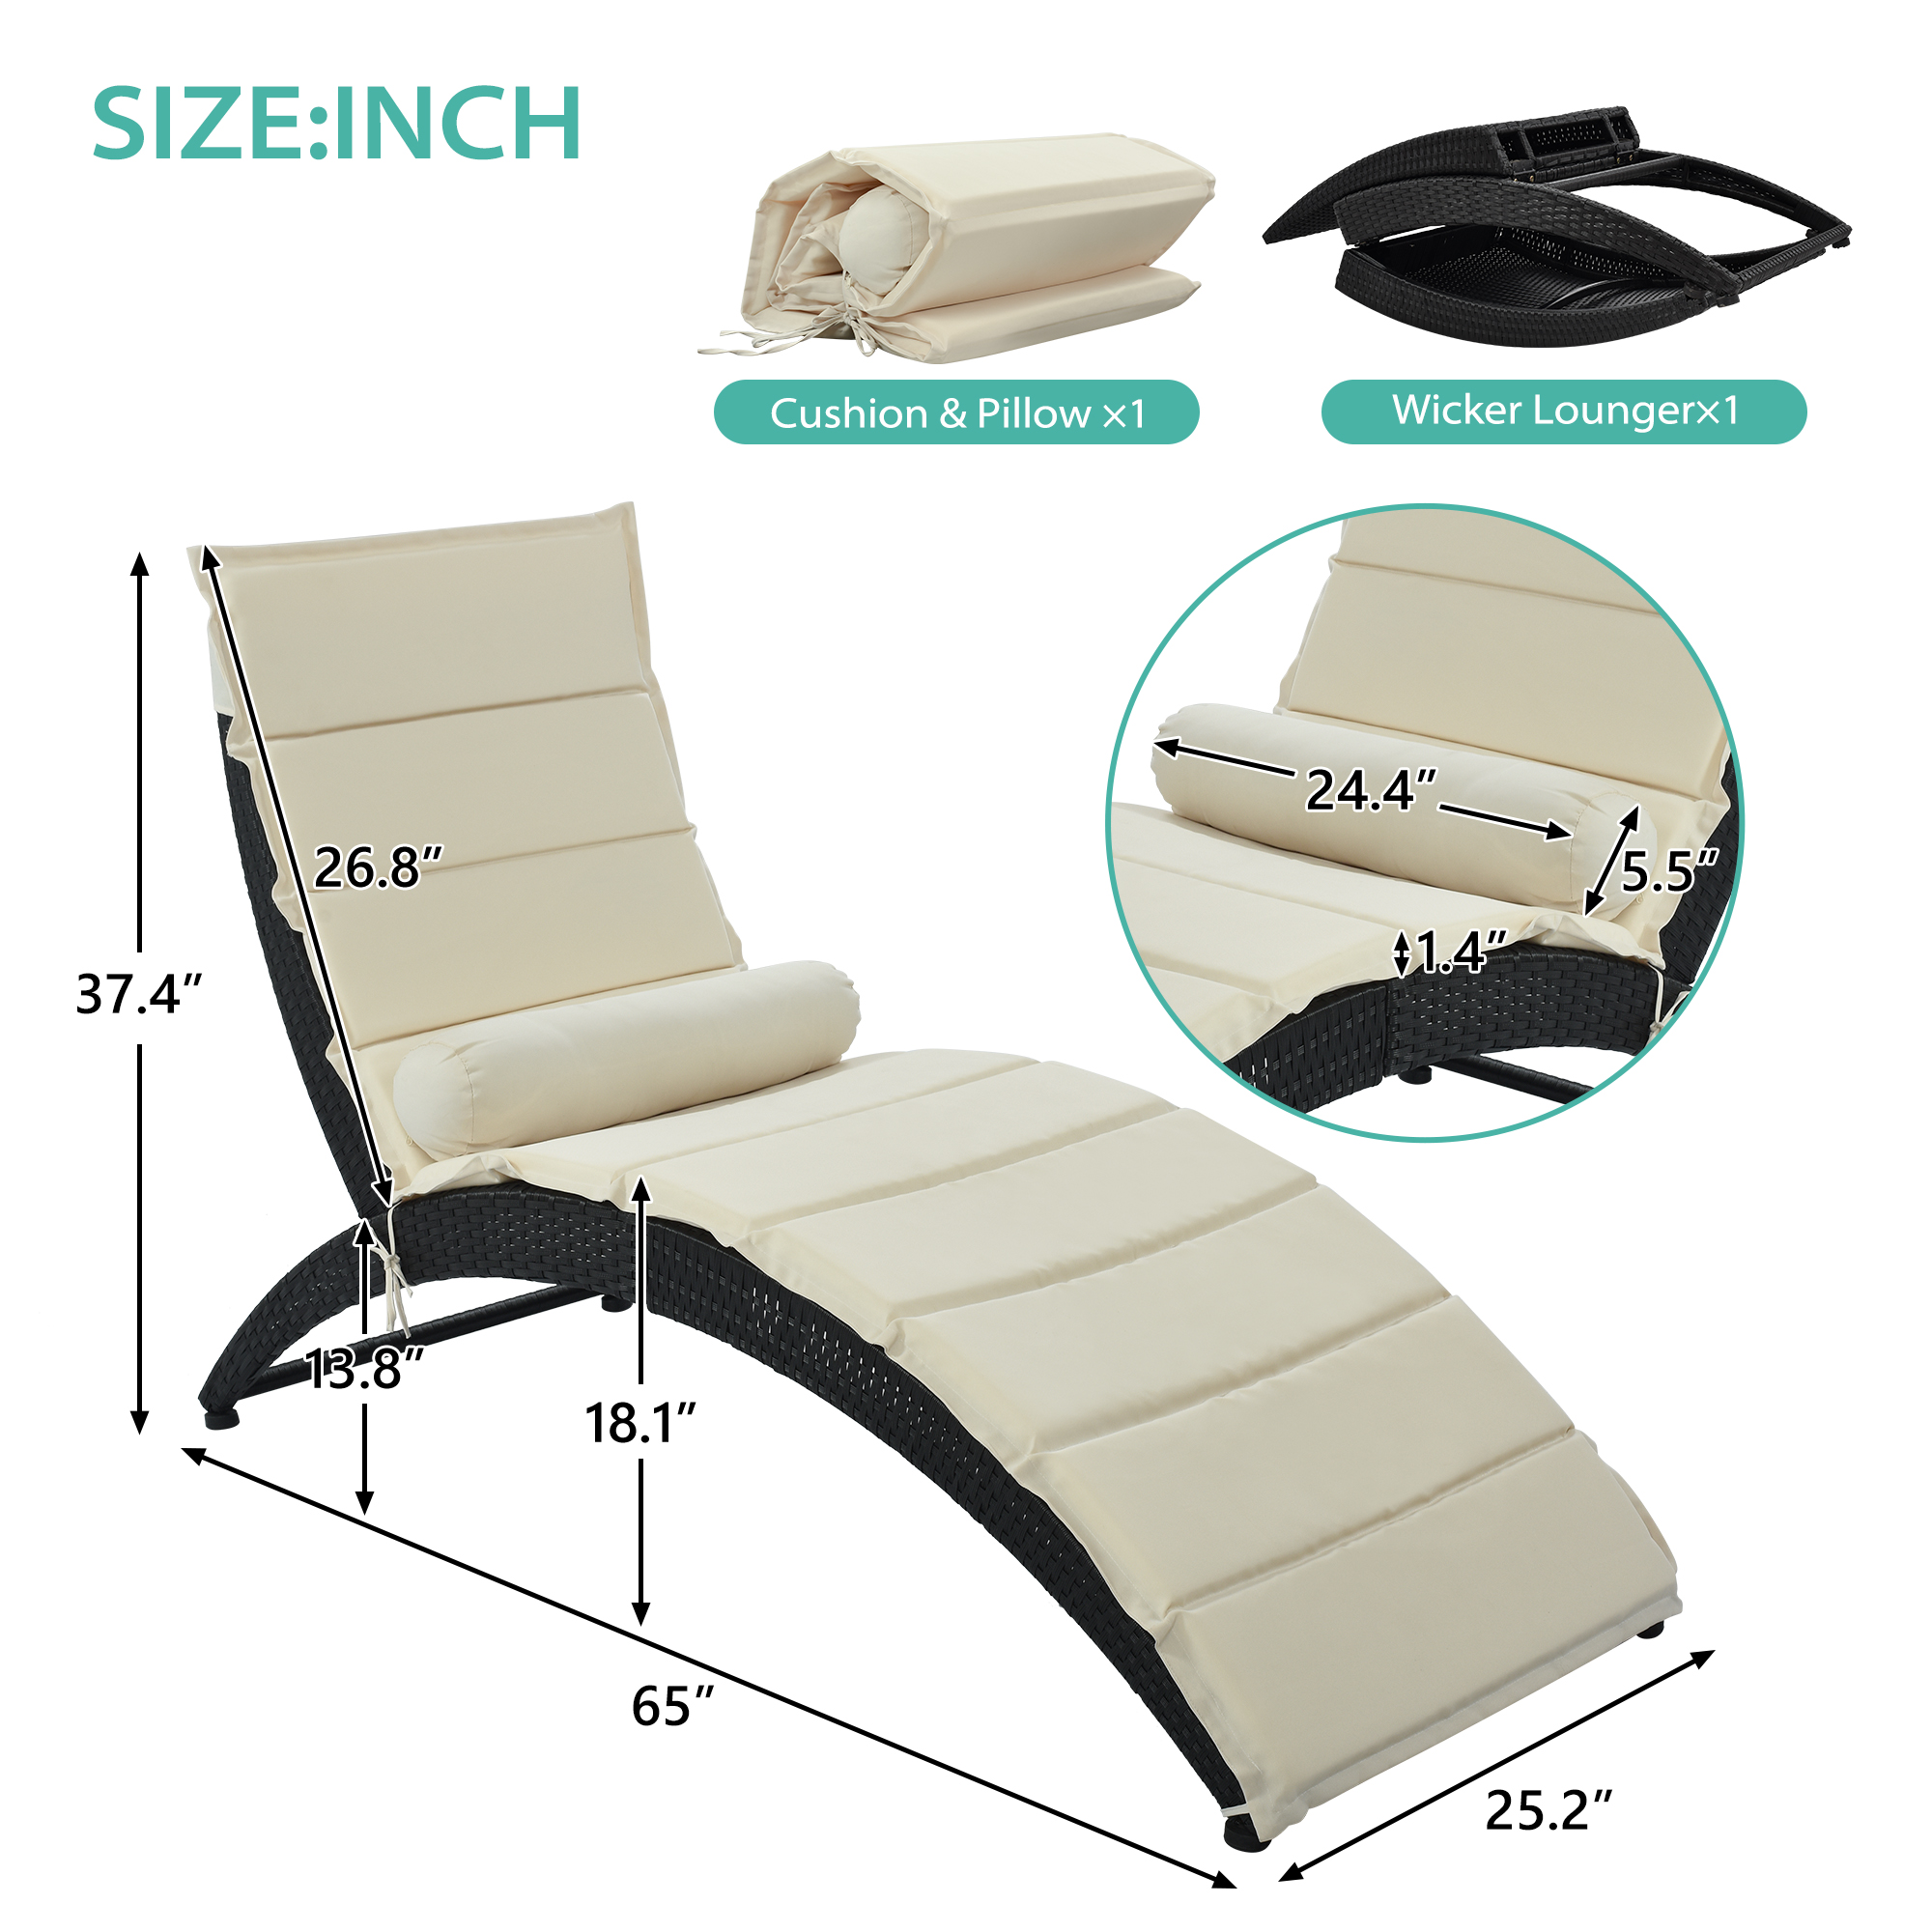 Patio Chaise Lounge, Removeble Reclining Camping Chair, PE Rattan Foldable Sun Recliner Chair with Seat Cushion, Poolside Garden Outdoor Chaise Lounge Chairs, JA1102 - image 3 of 8